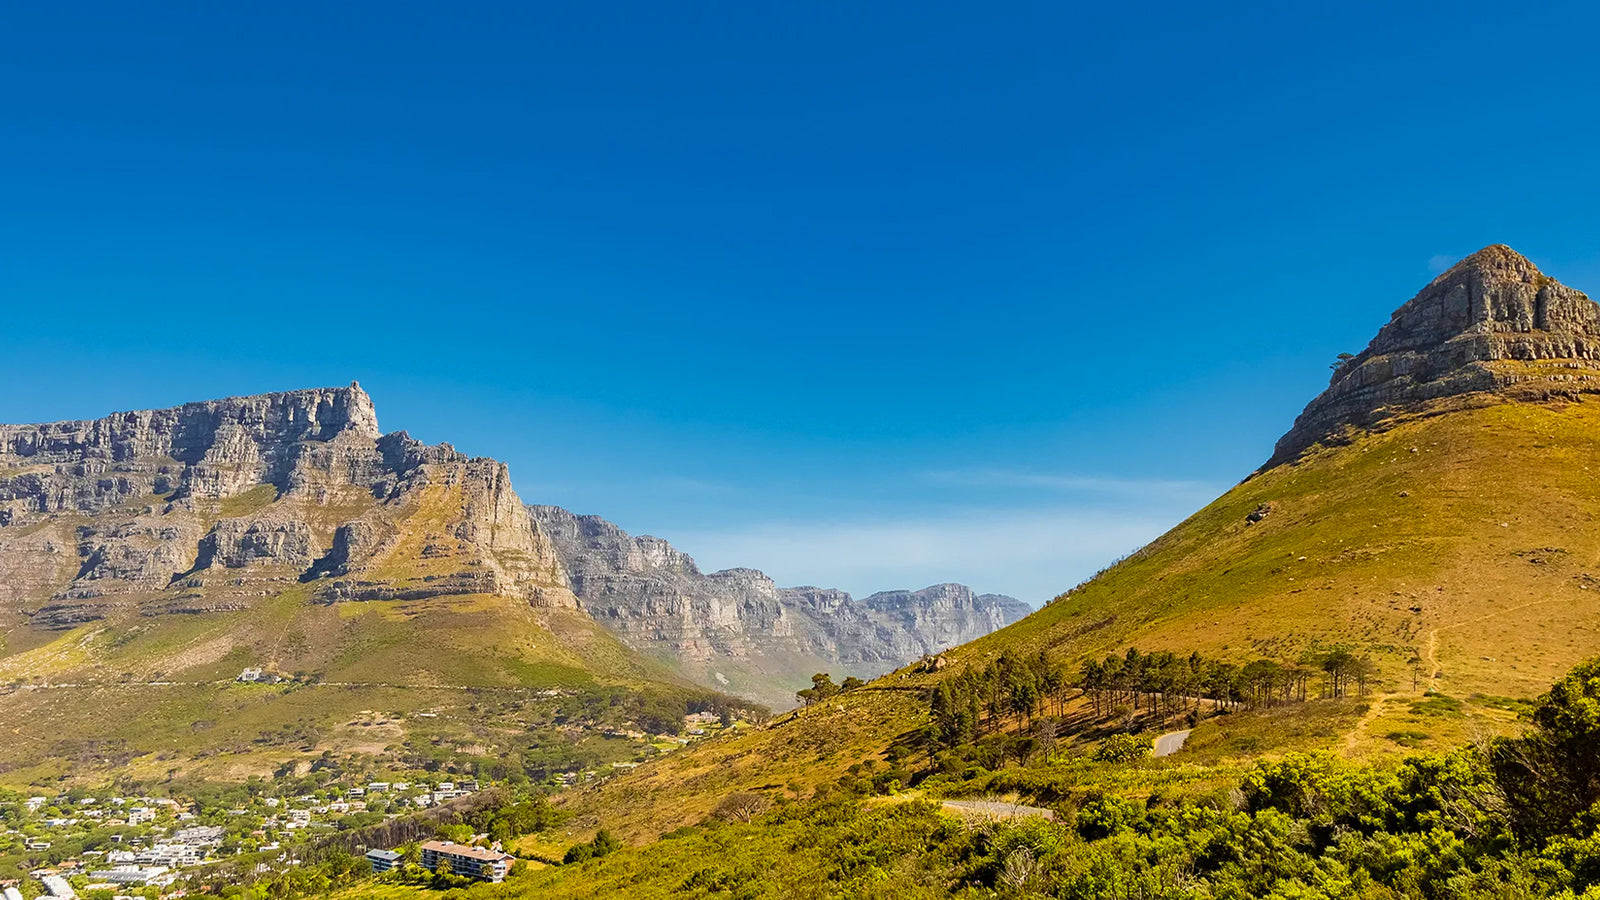 TOP PLACES TO PROPOSE IN CAPE TOWN - SHIMANSKY.CO.ZA